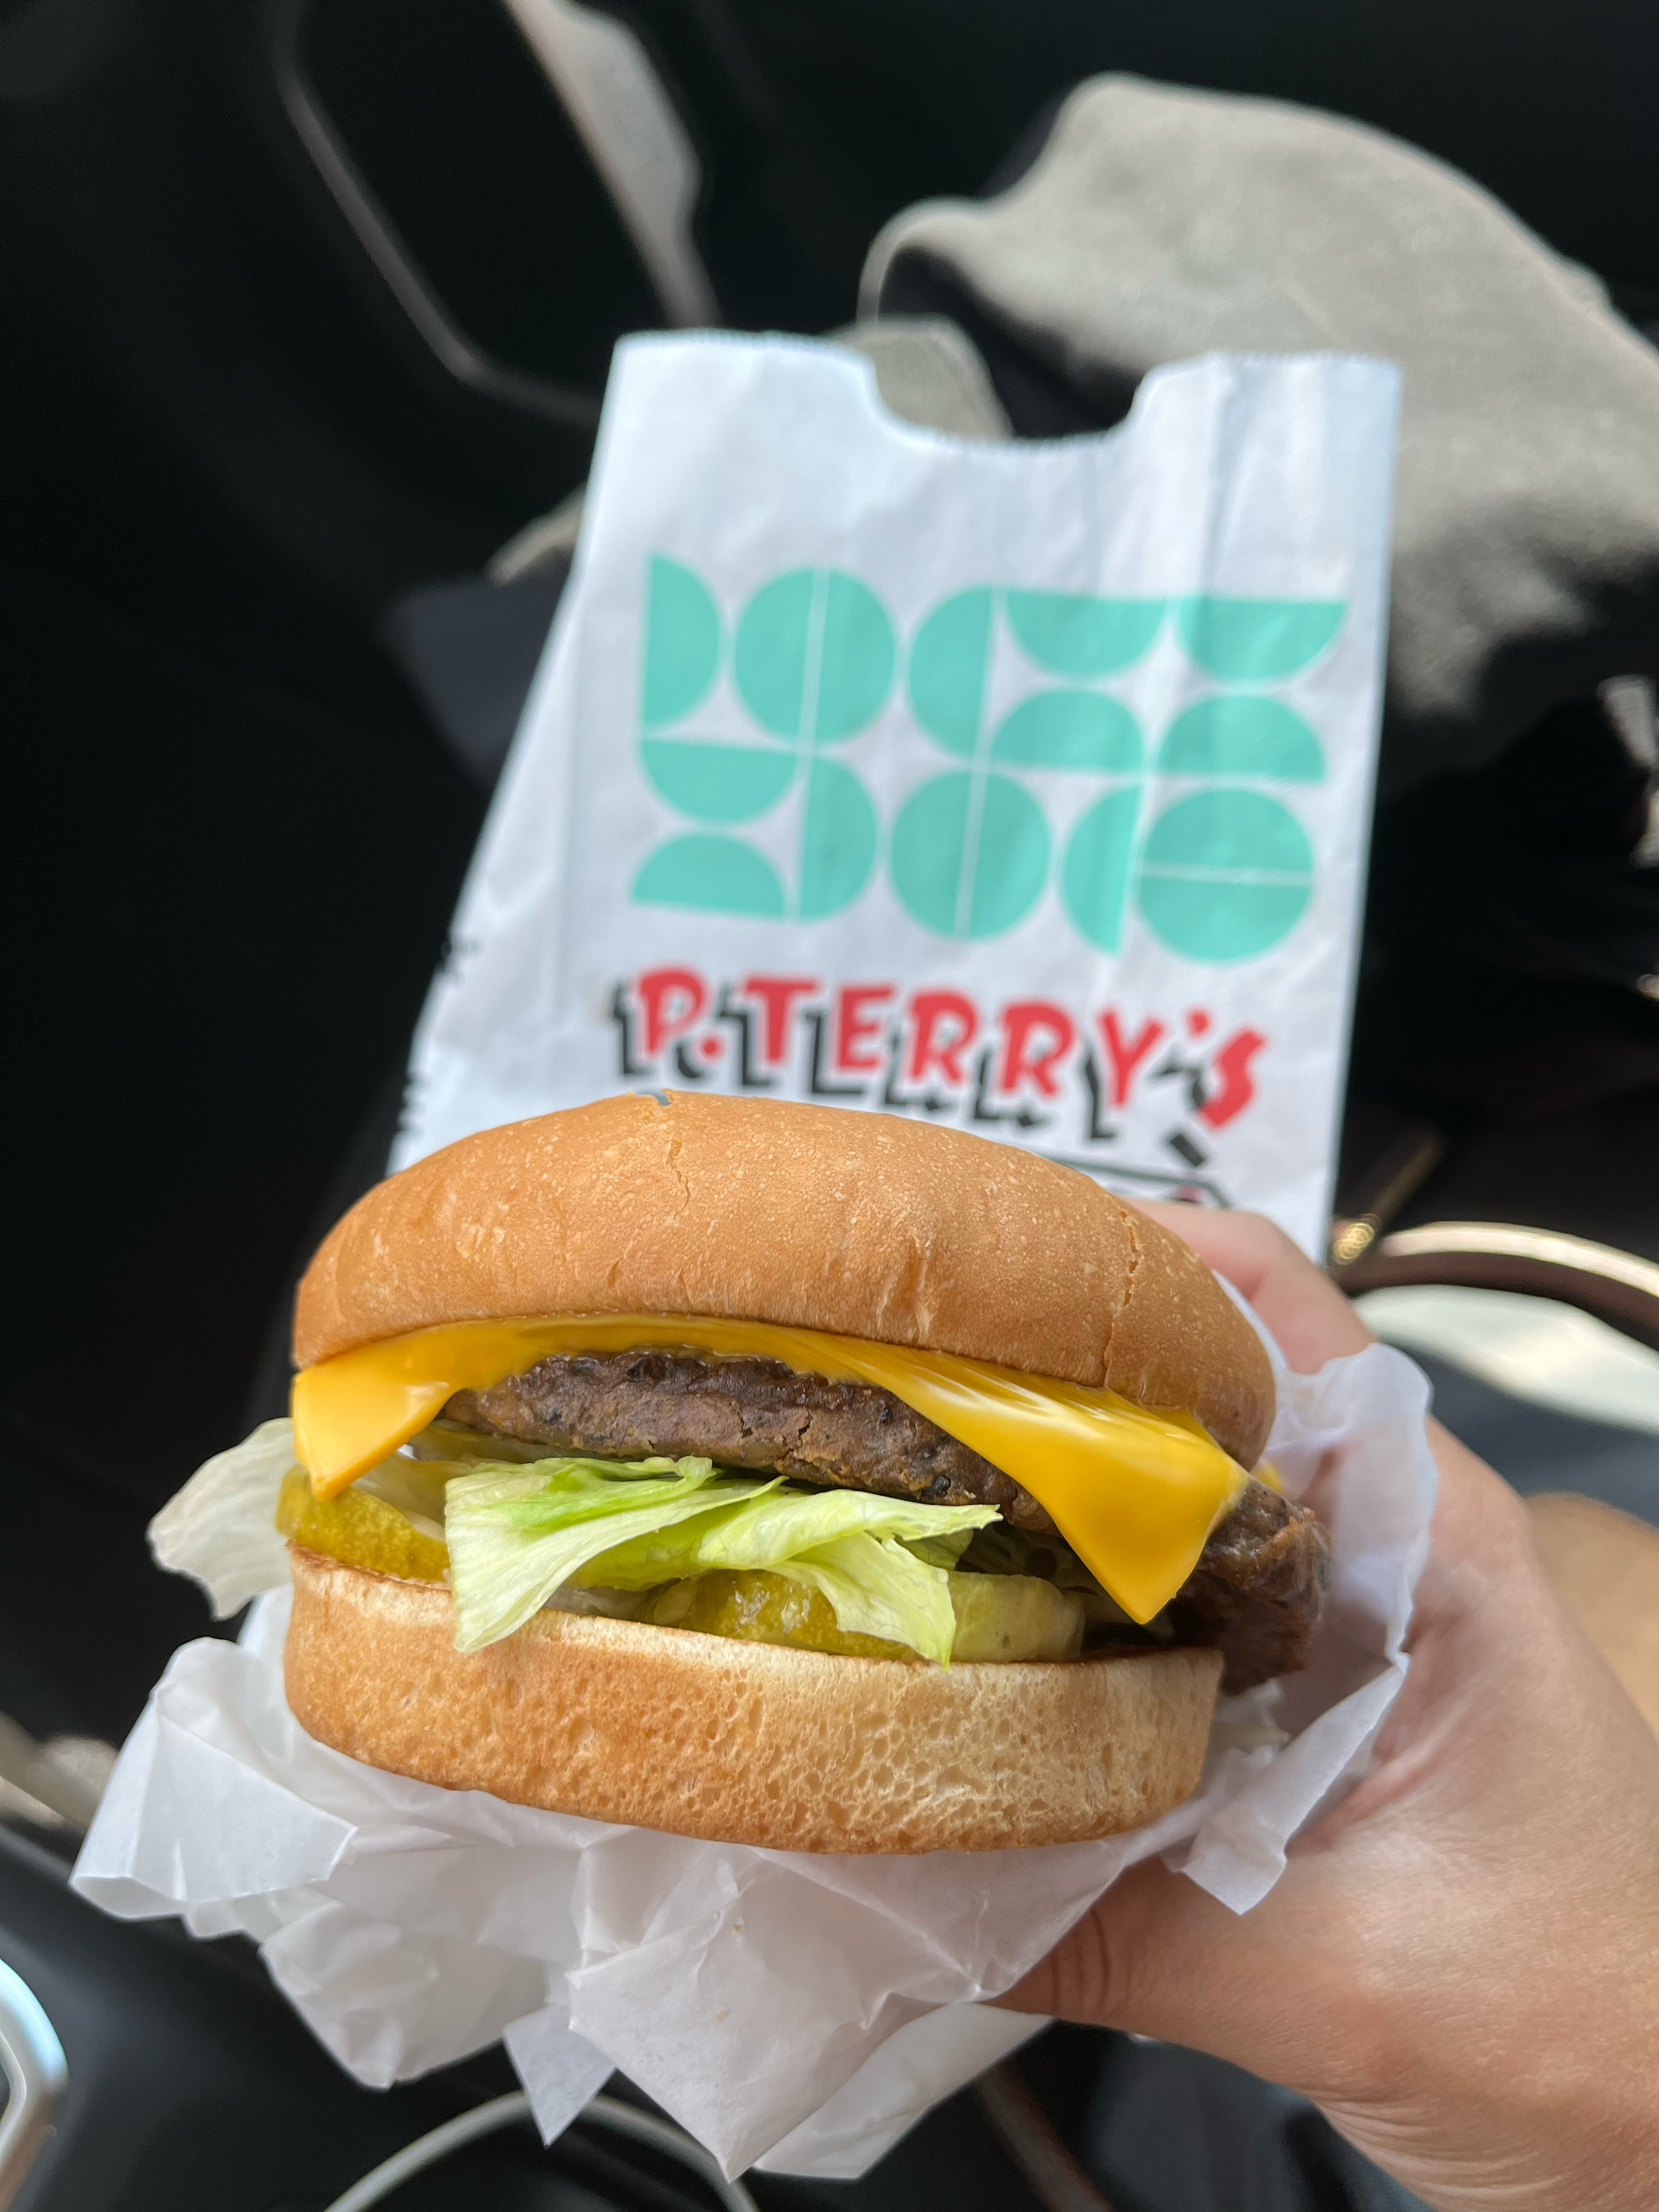 burger held in front of a P. Terry's bag in drive thru